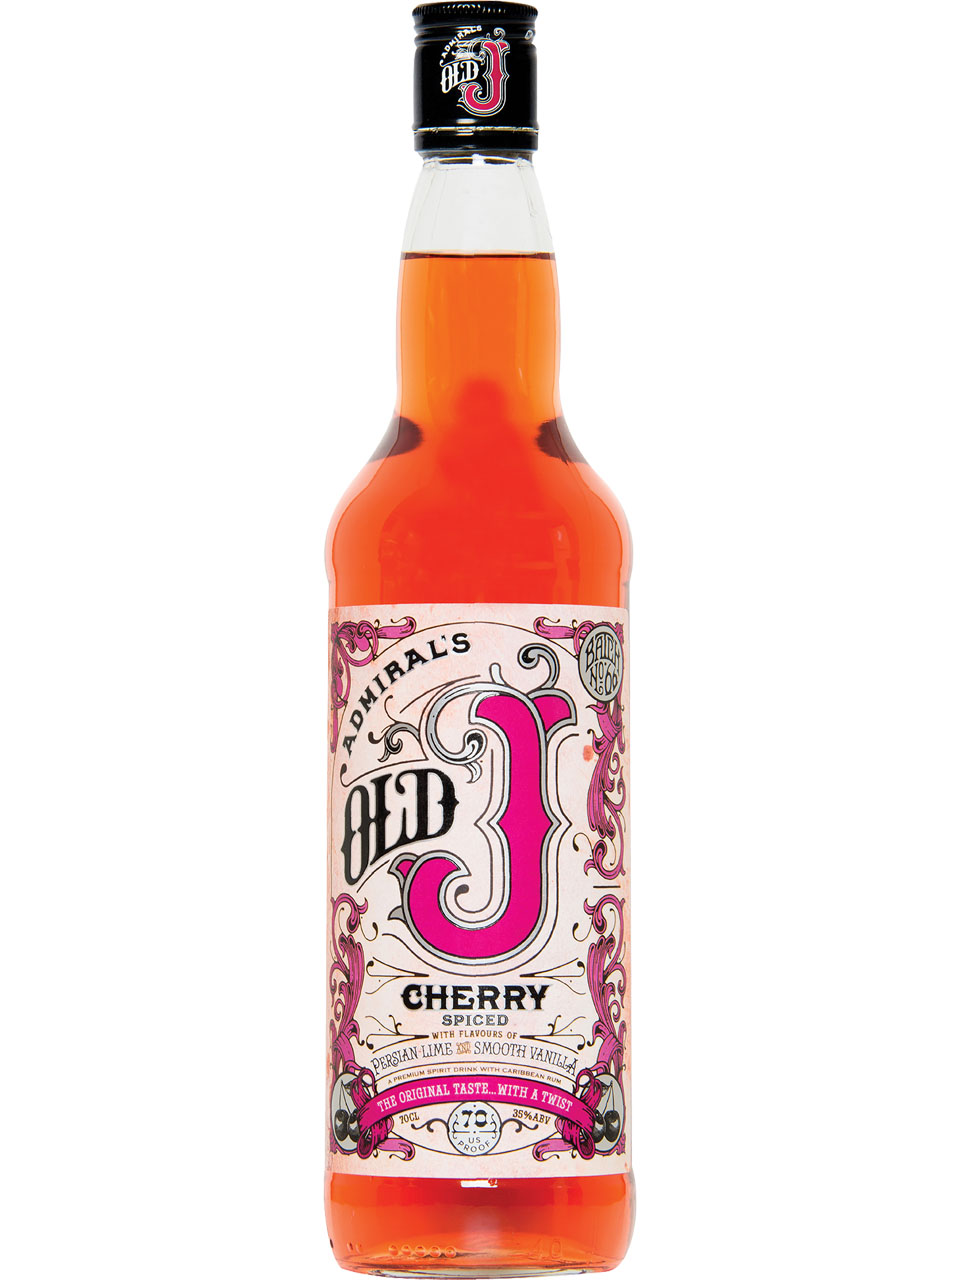 Admiral's Old J Cherry Spiced Rum